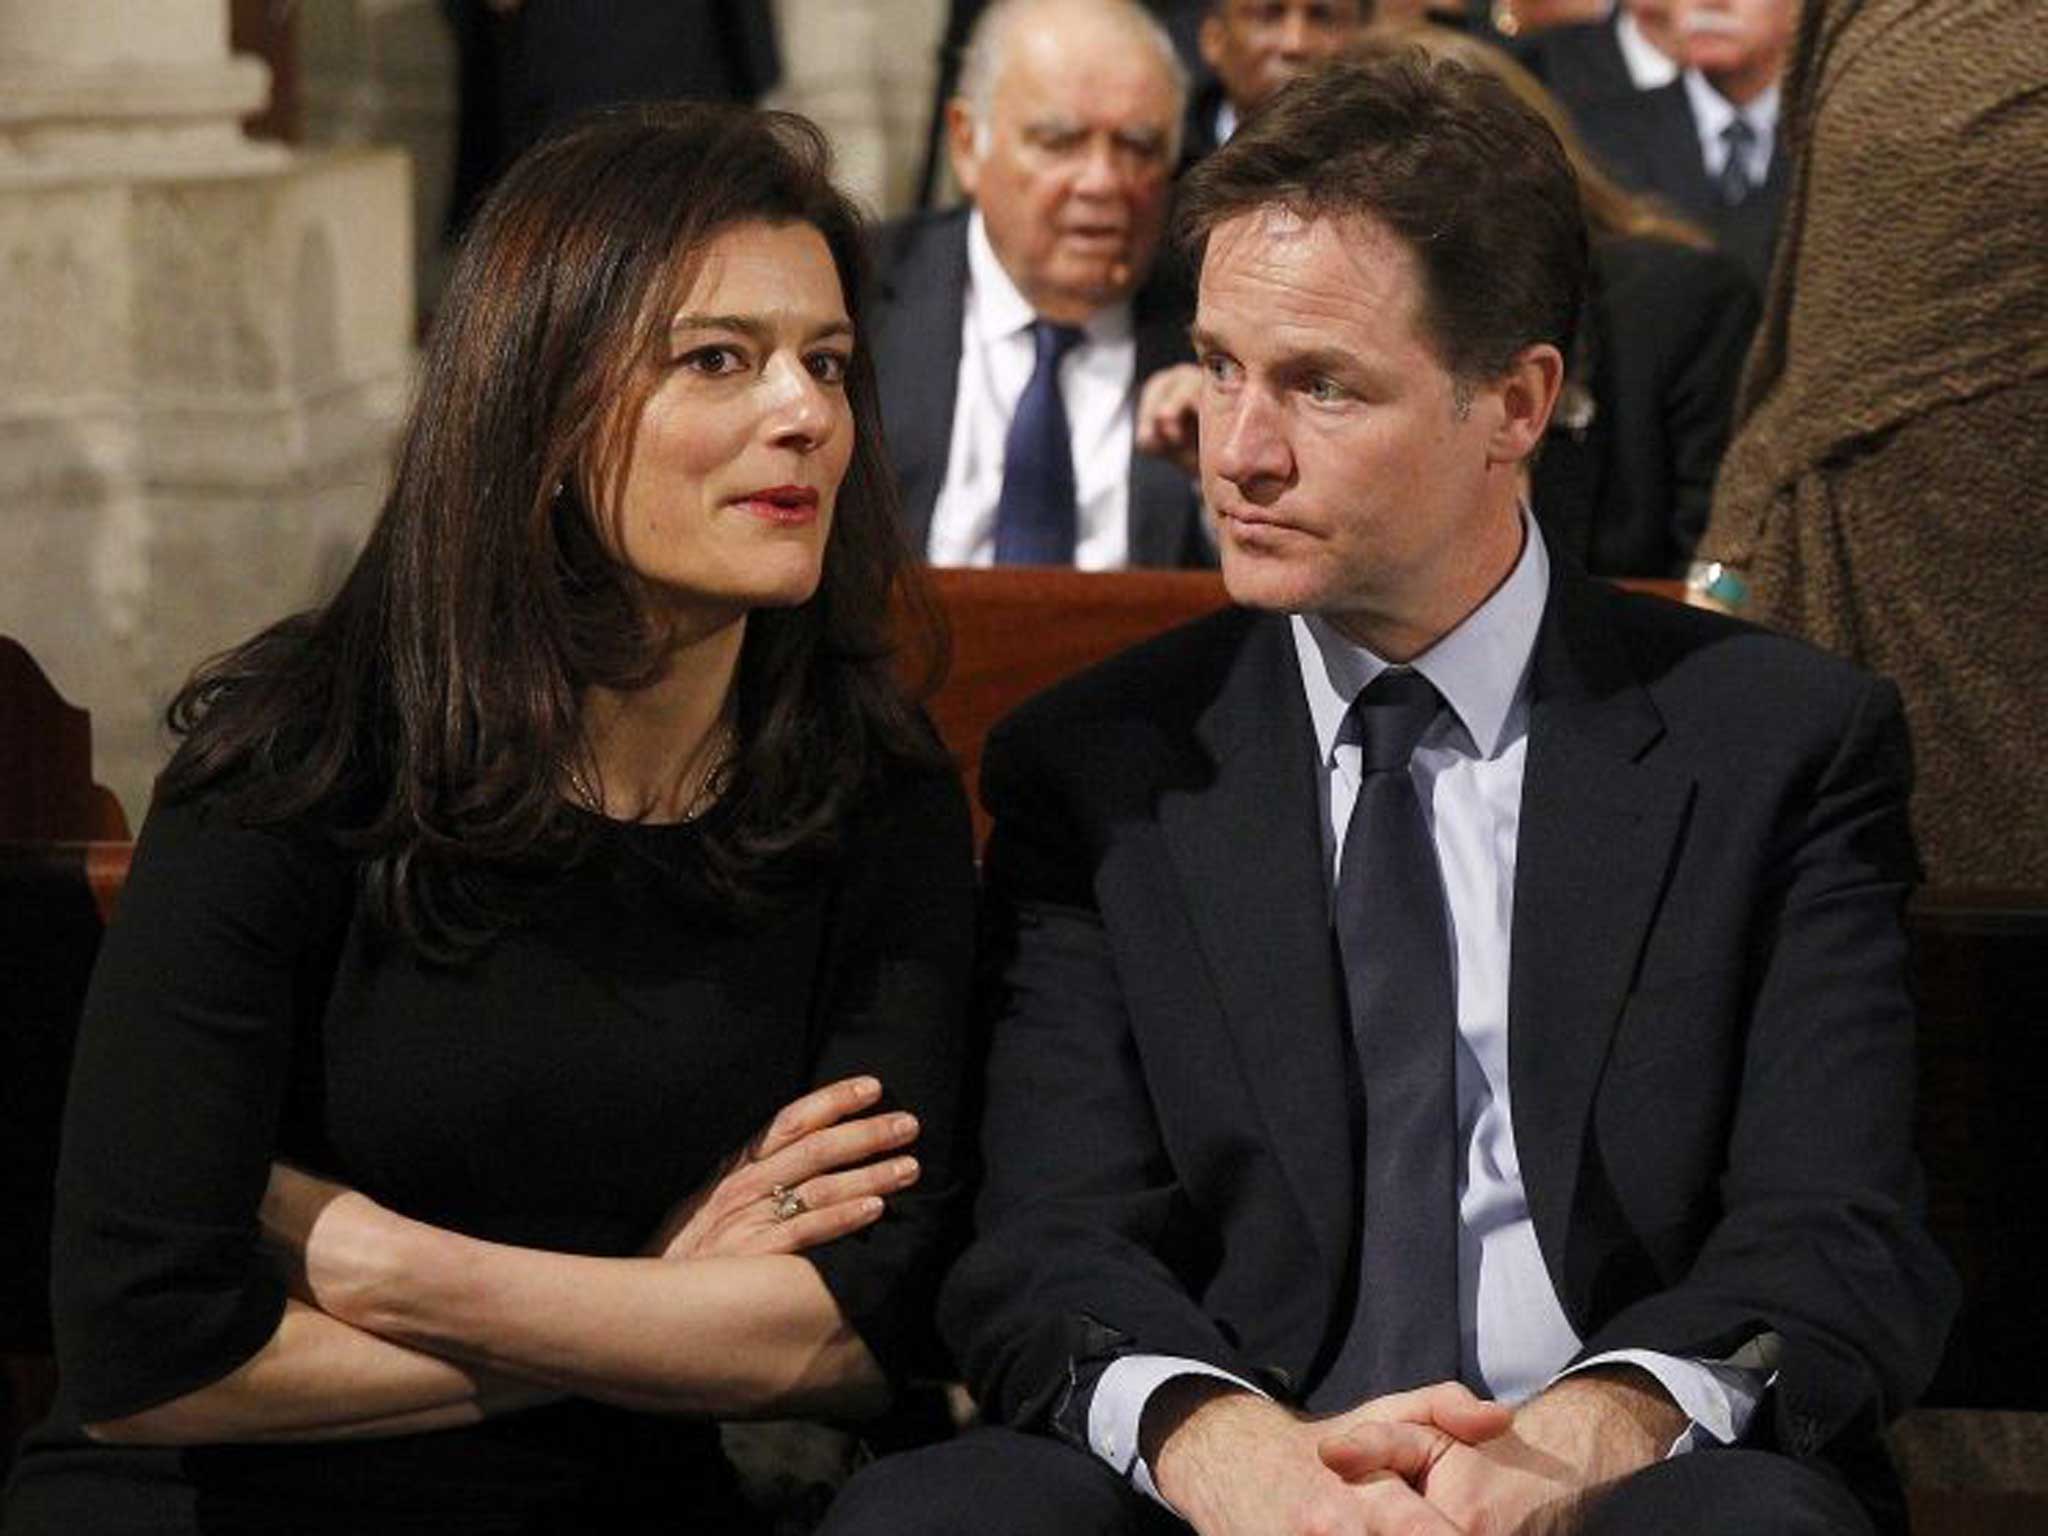 Miriam Gonzalez Durantez, with Nick Clegg, is not the traditional wife of a British politician